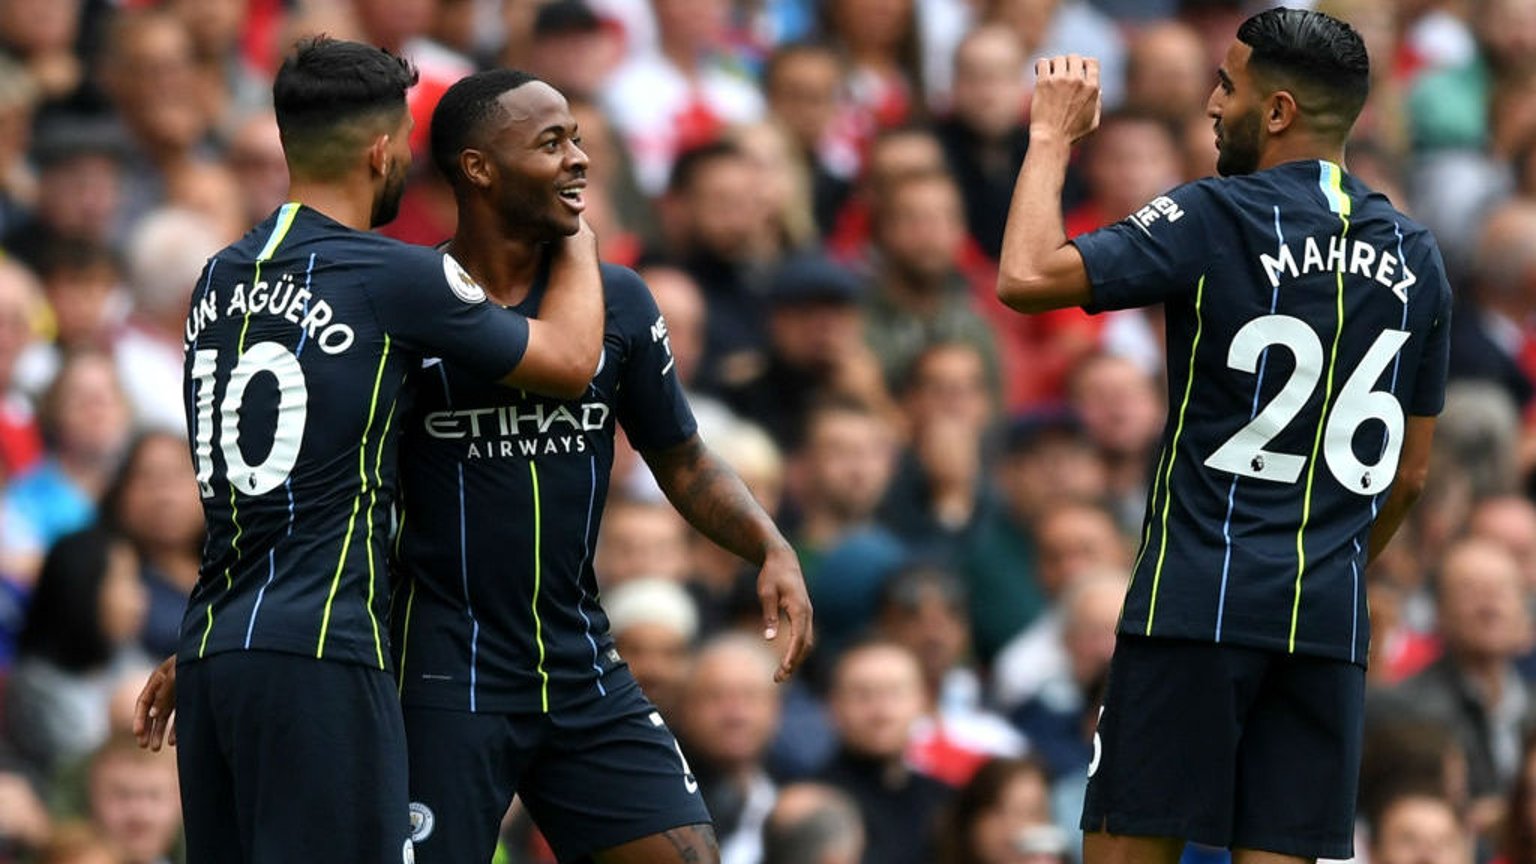 CELEBRATIONS: Sterling celebrates with Aguero and Mahrez after his thunderous strike takes us into the lead.